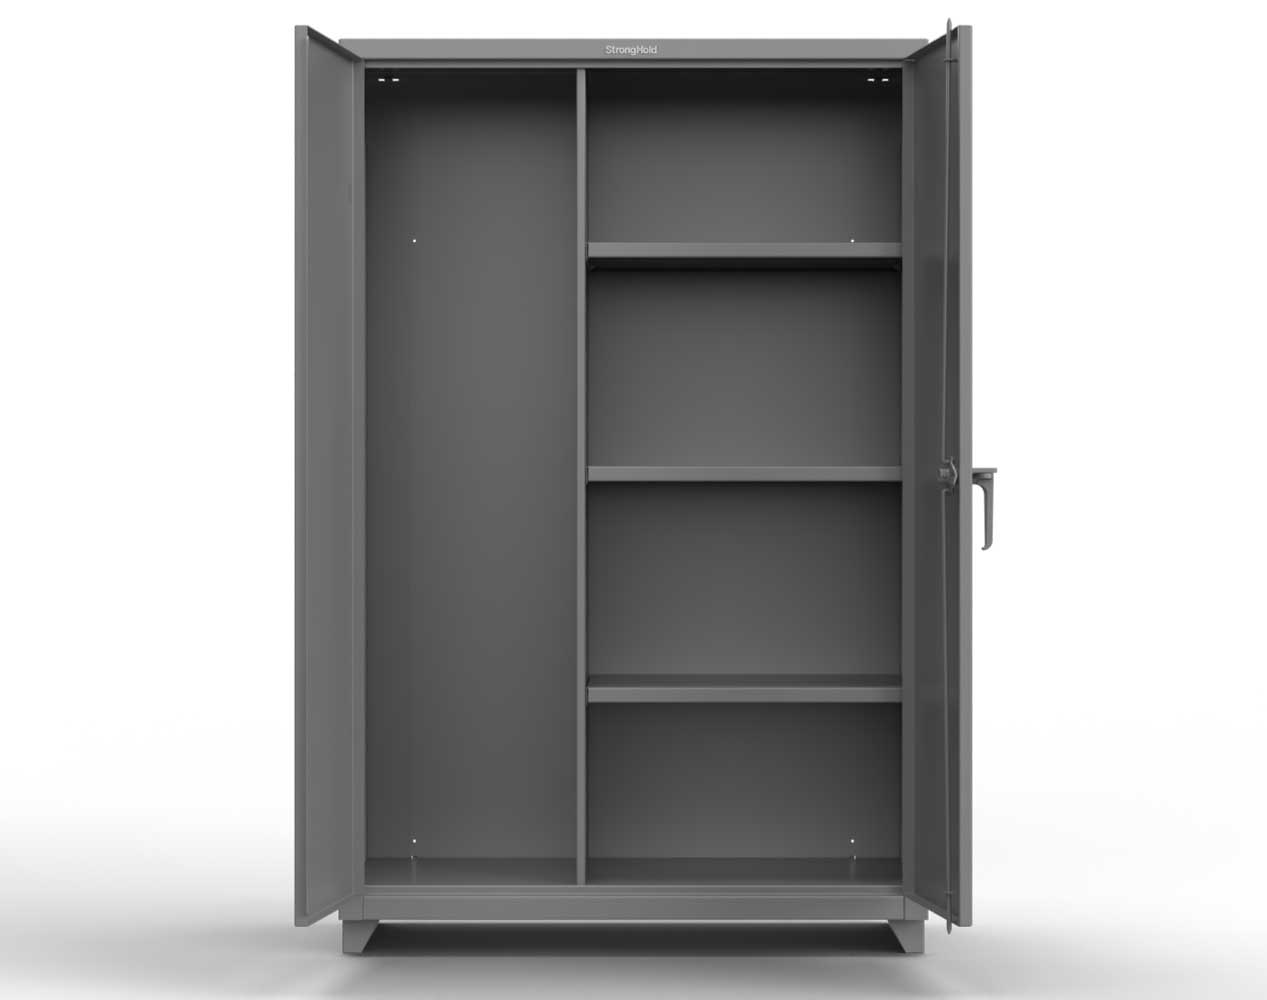 Extra Heavy Duty 14 GA Janitorial Cabinet with 4 Shelves - 36 In. W x 24 In. D x 75 In. H